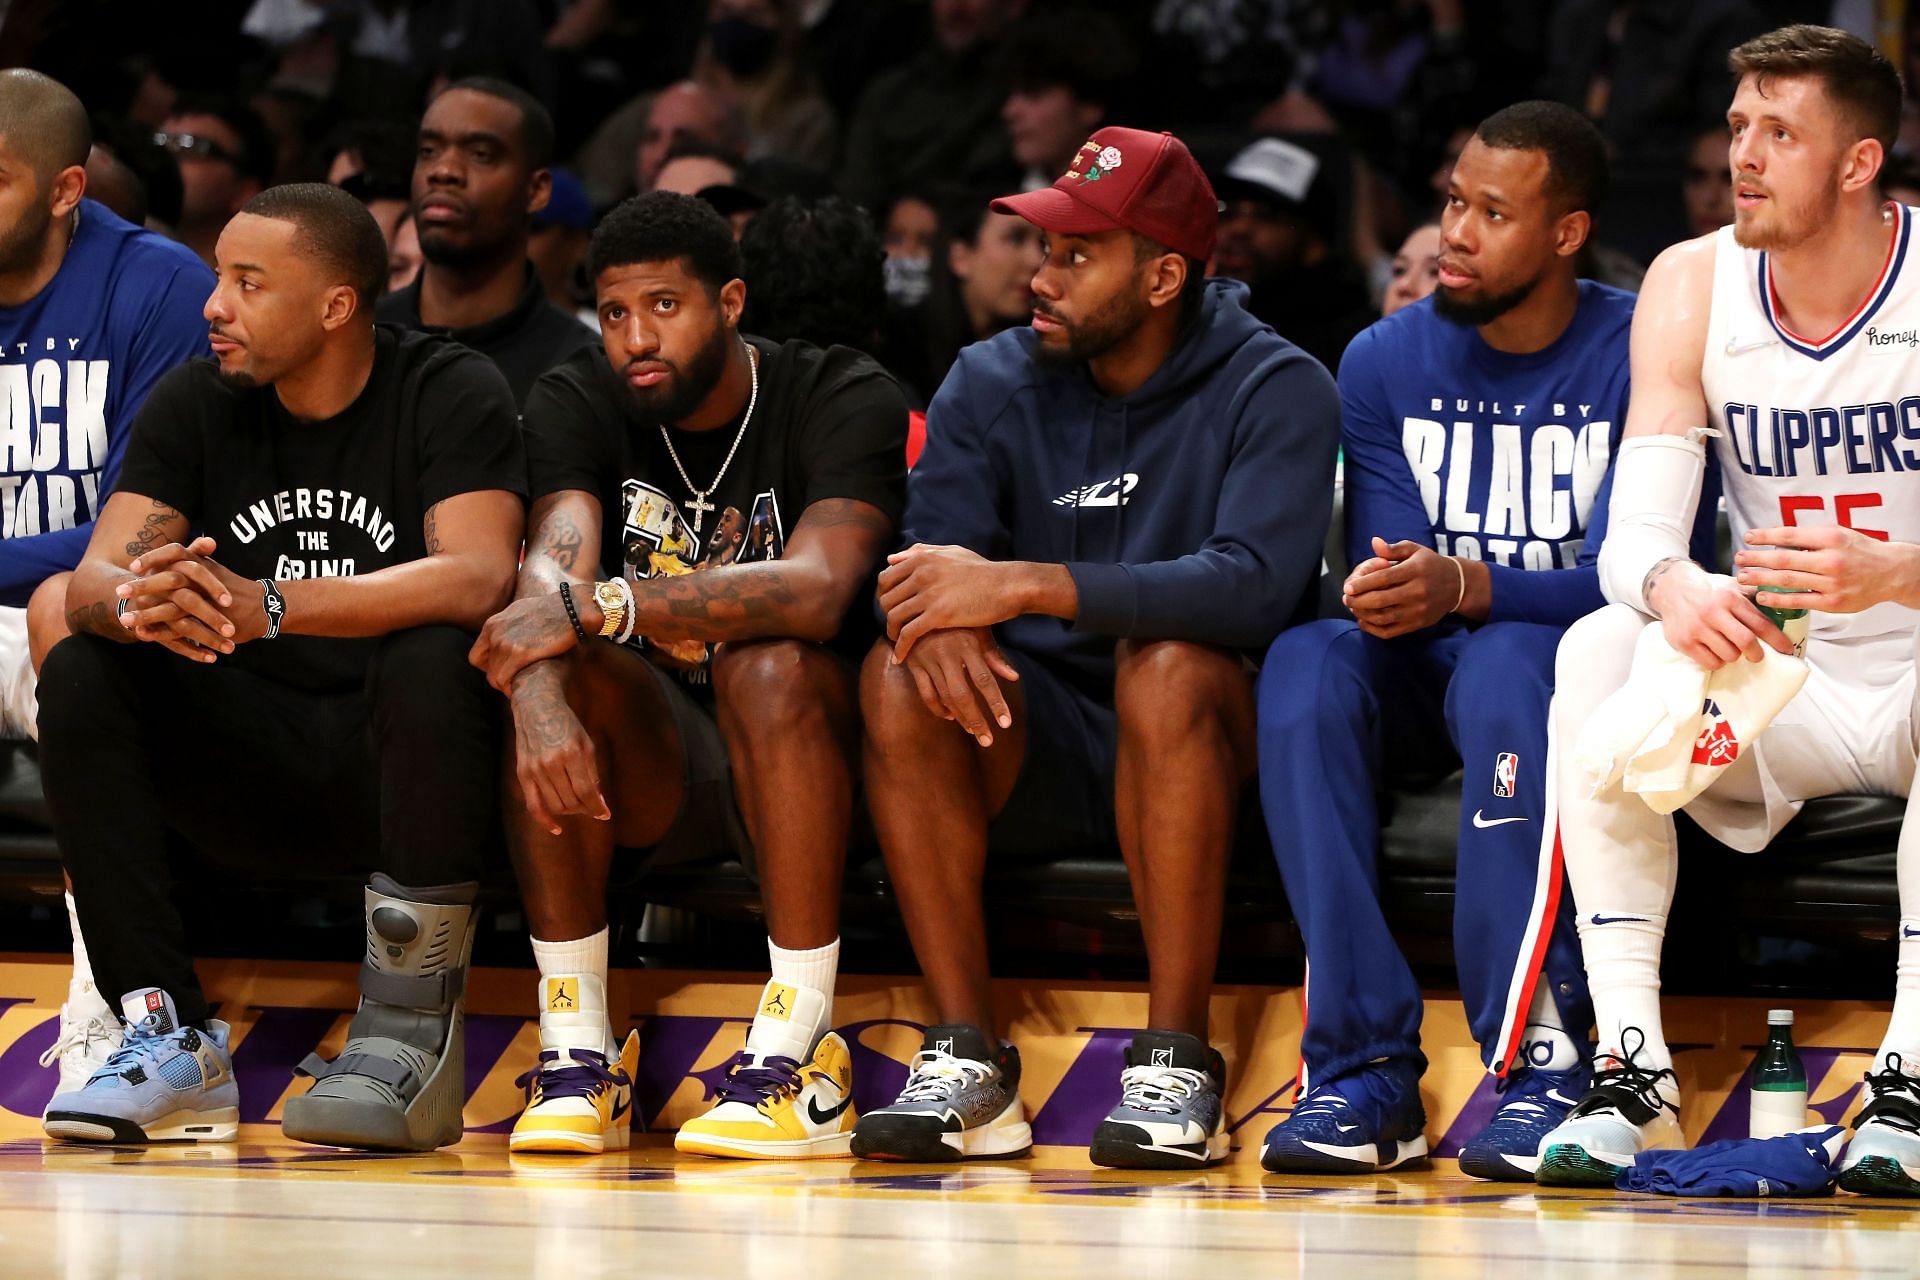 The LA Clippers will be looking to make a deep run in the NBA Playoffs this season